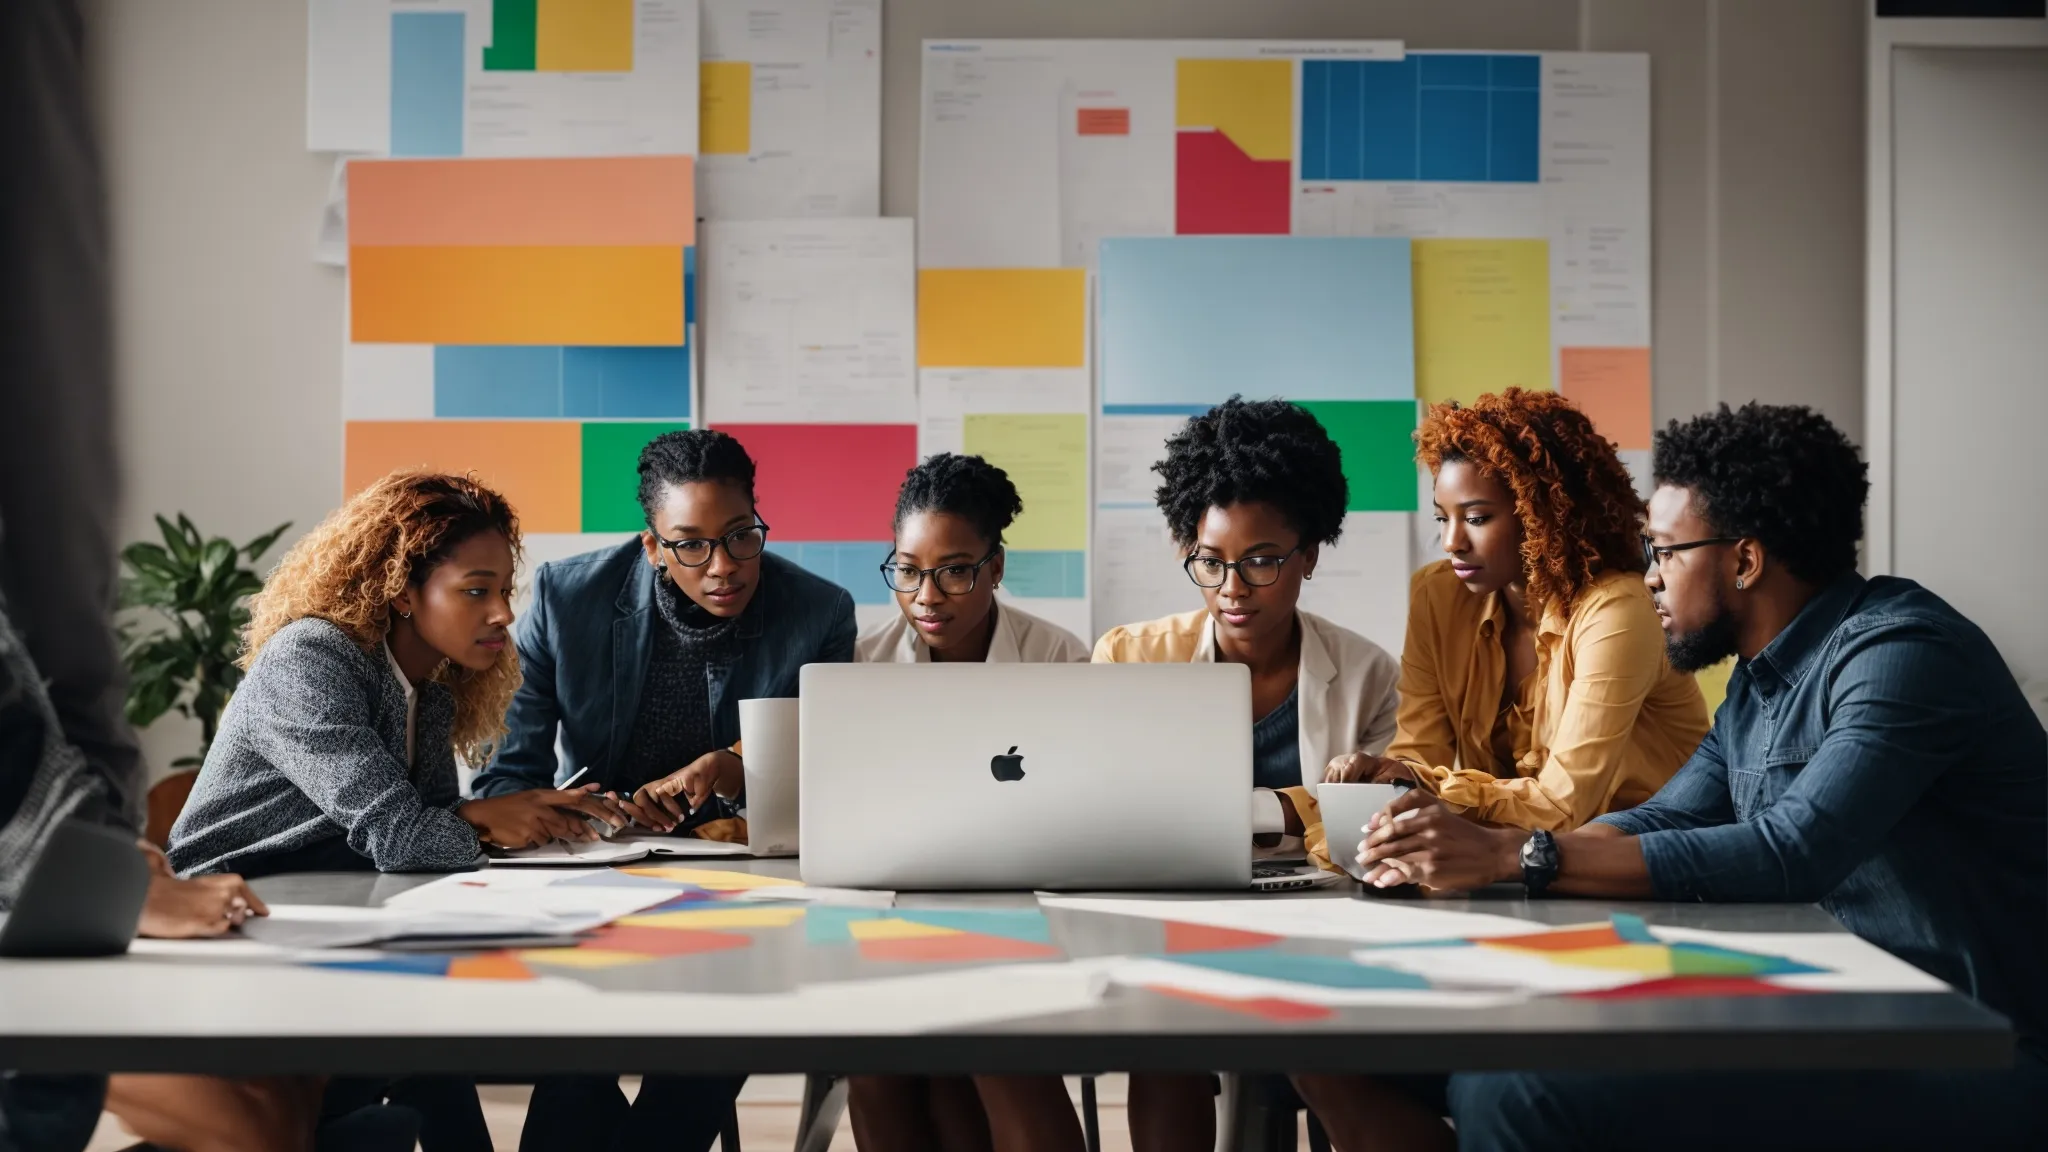 a diverse group of professionals engaging in a lively brainstorming session around a laptop displaying colorful graphs and strategy documents.